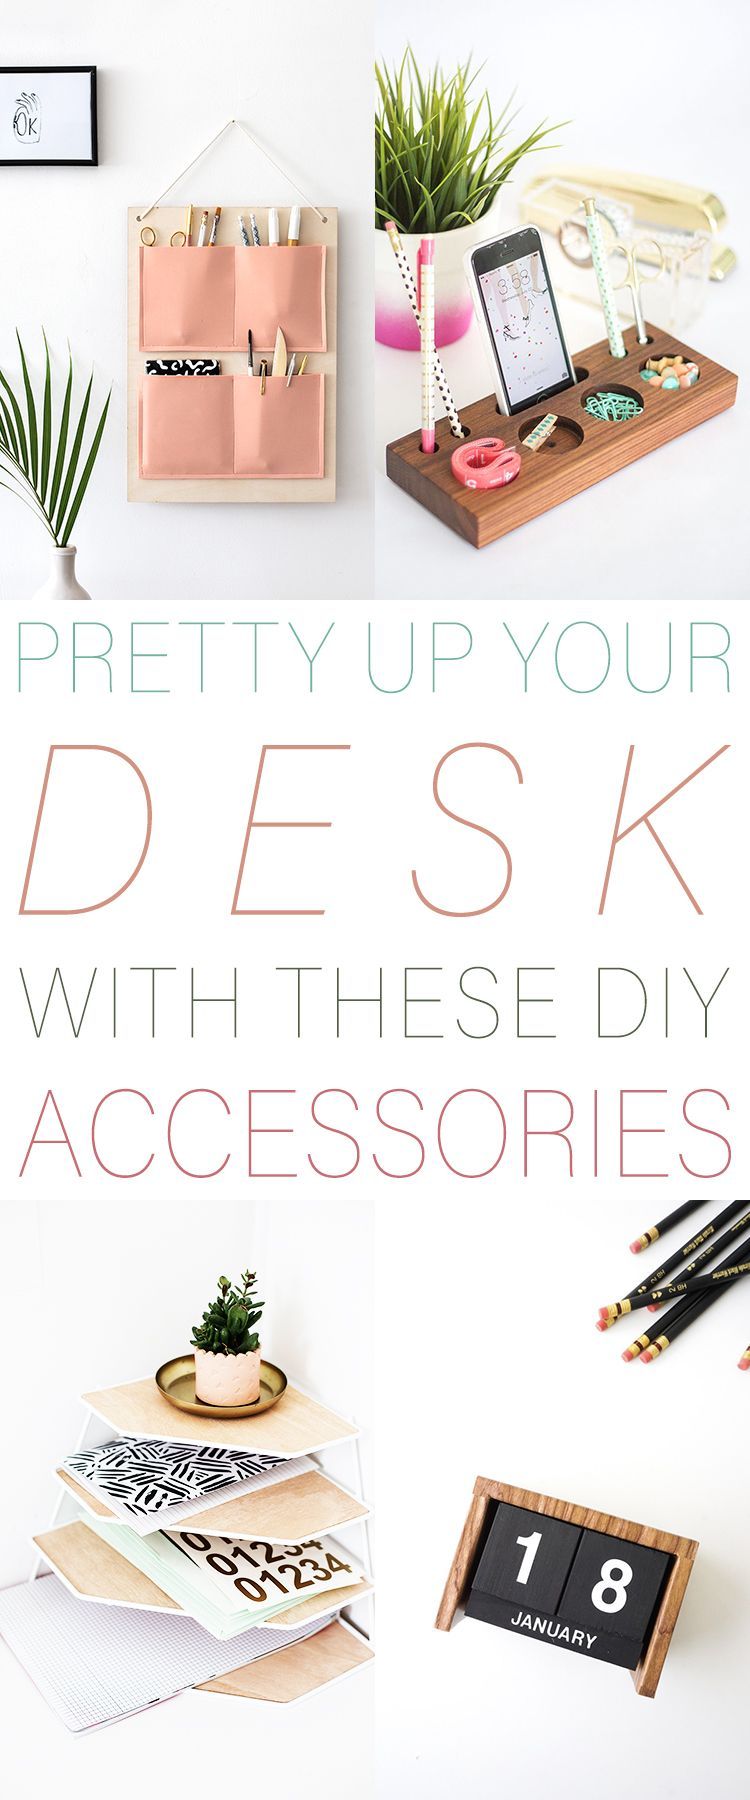 Pretty Up Your Desk With These DIY Desk Accessories - The Cottage Market - Pretty Up Your Desk With These DIY Desk Accessories - The Cottage Market -   15 diy Desk decorations ideas